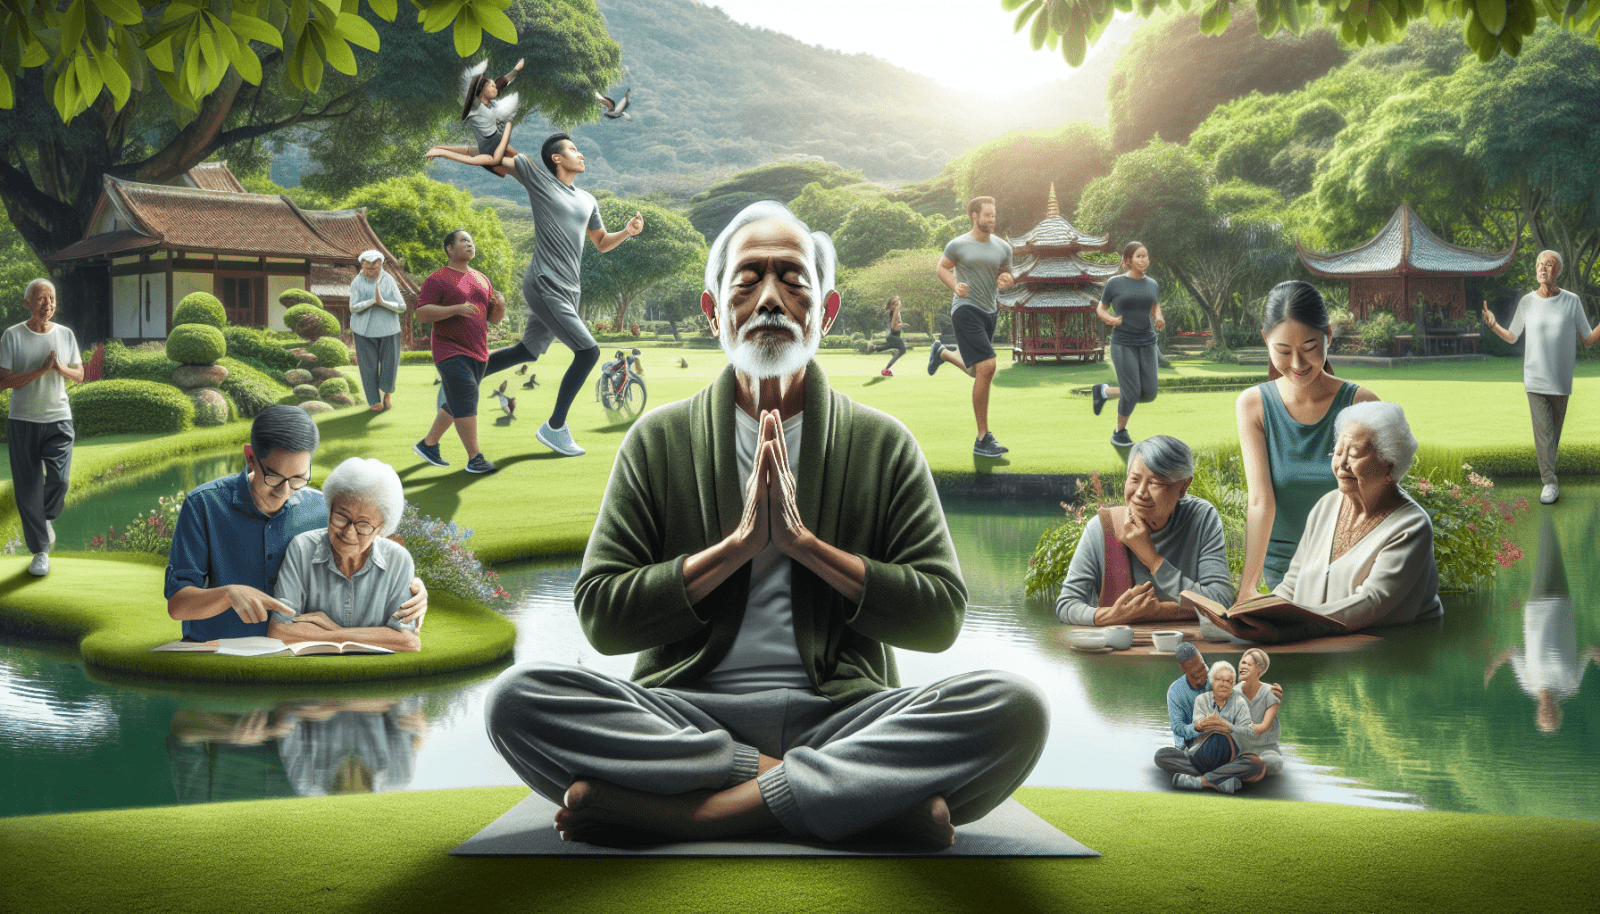 A serene scene in a lush green park with various activities: an elderly man in the foreground meditating, people practicing tai chi, a couple reading together, and individuals performing yoga and jogging, against a backdrop of traditional Asian architecture and mountains.